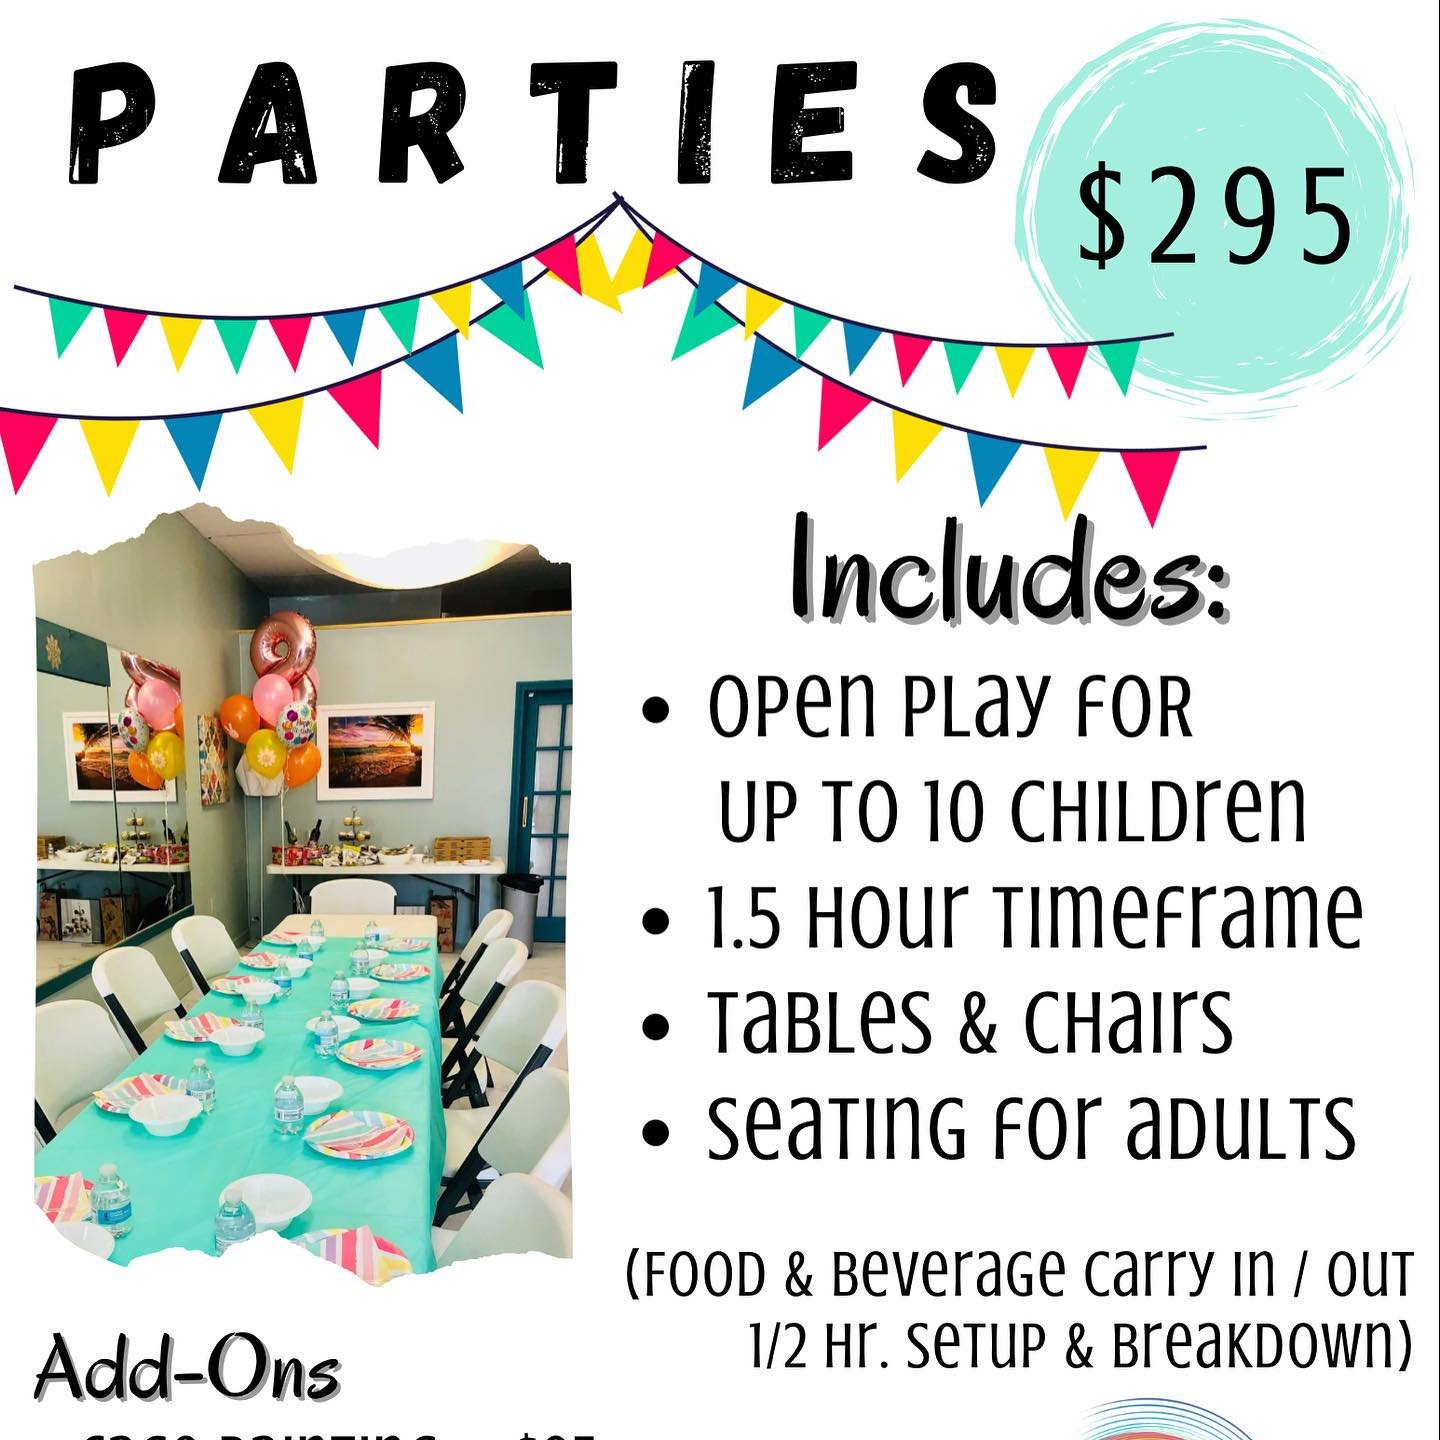 📣 Did you know?! We offer birthday party 🥳 options‼️ Open Play (designed for children 0-7) and Jewelry-Making (designed for kids 8+). Plus several add-on options for your enjoyment/convenience. Competitive pricing too! 💵 check out www.zenergizeri.